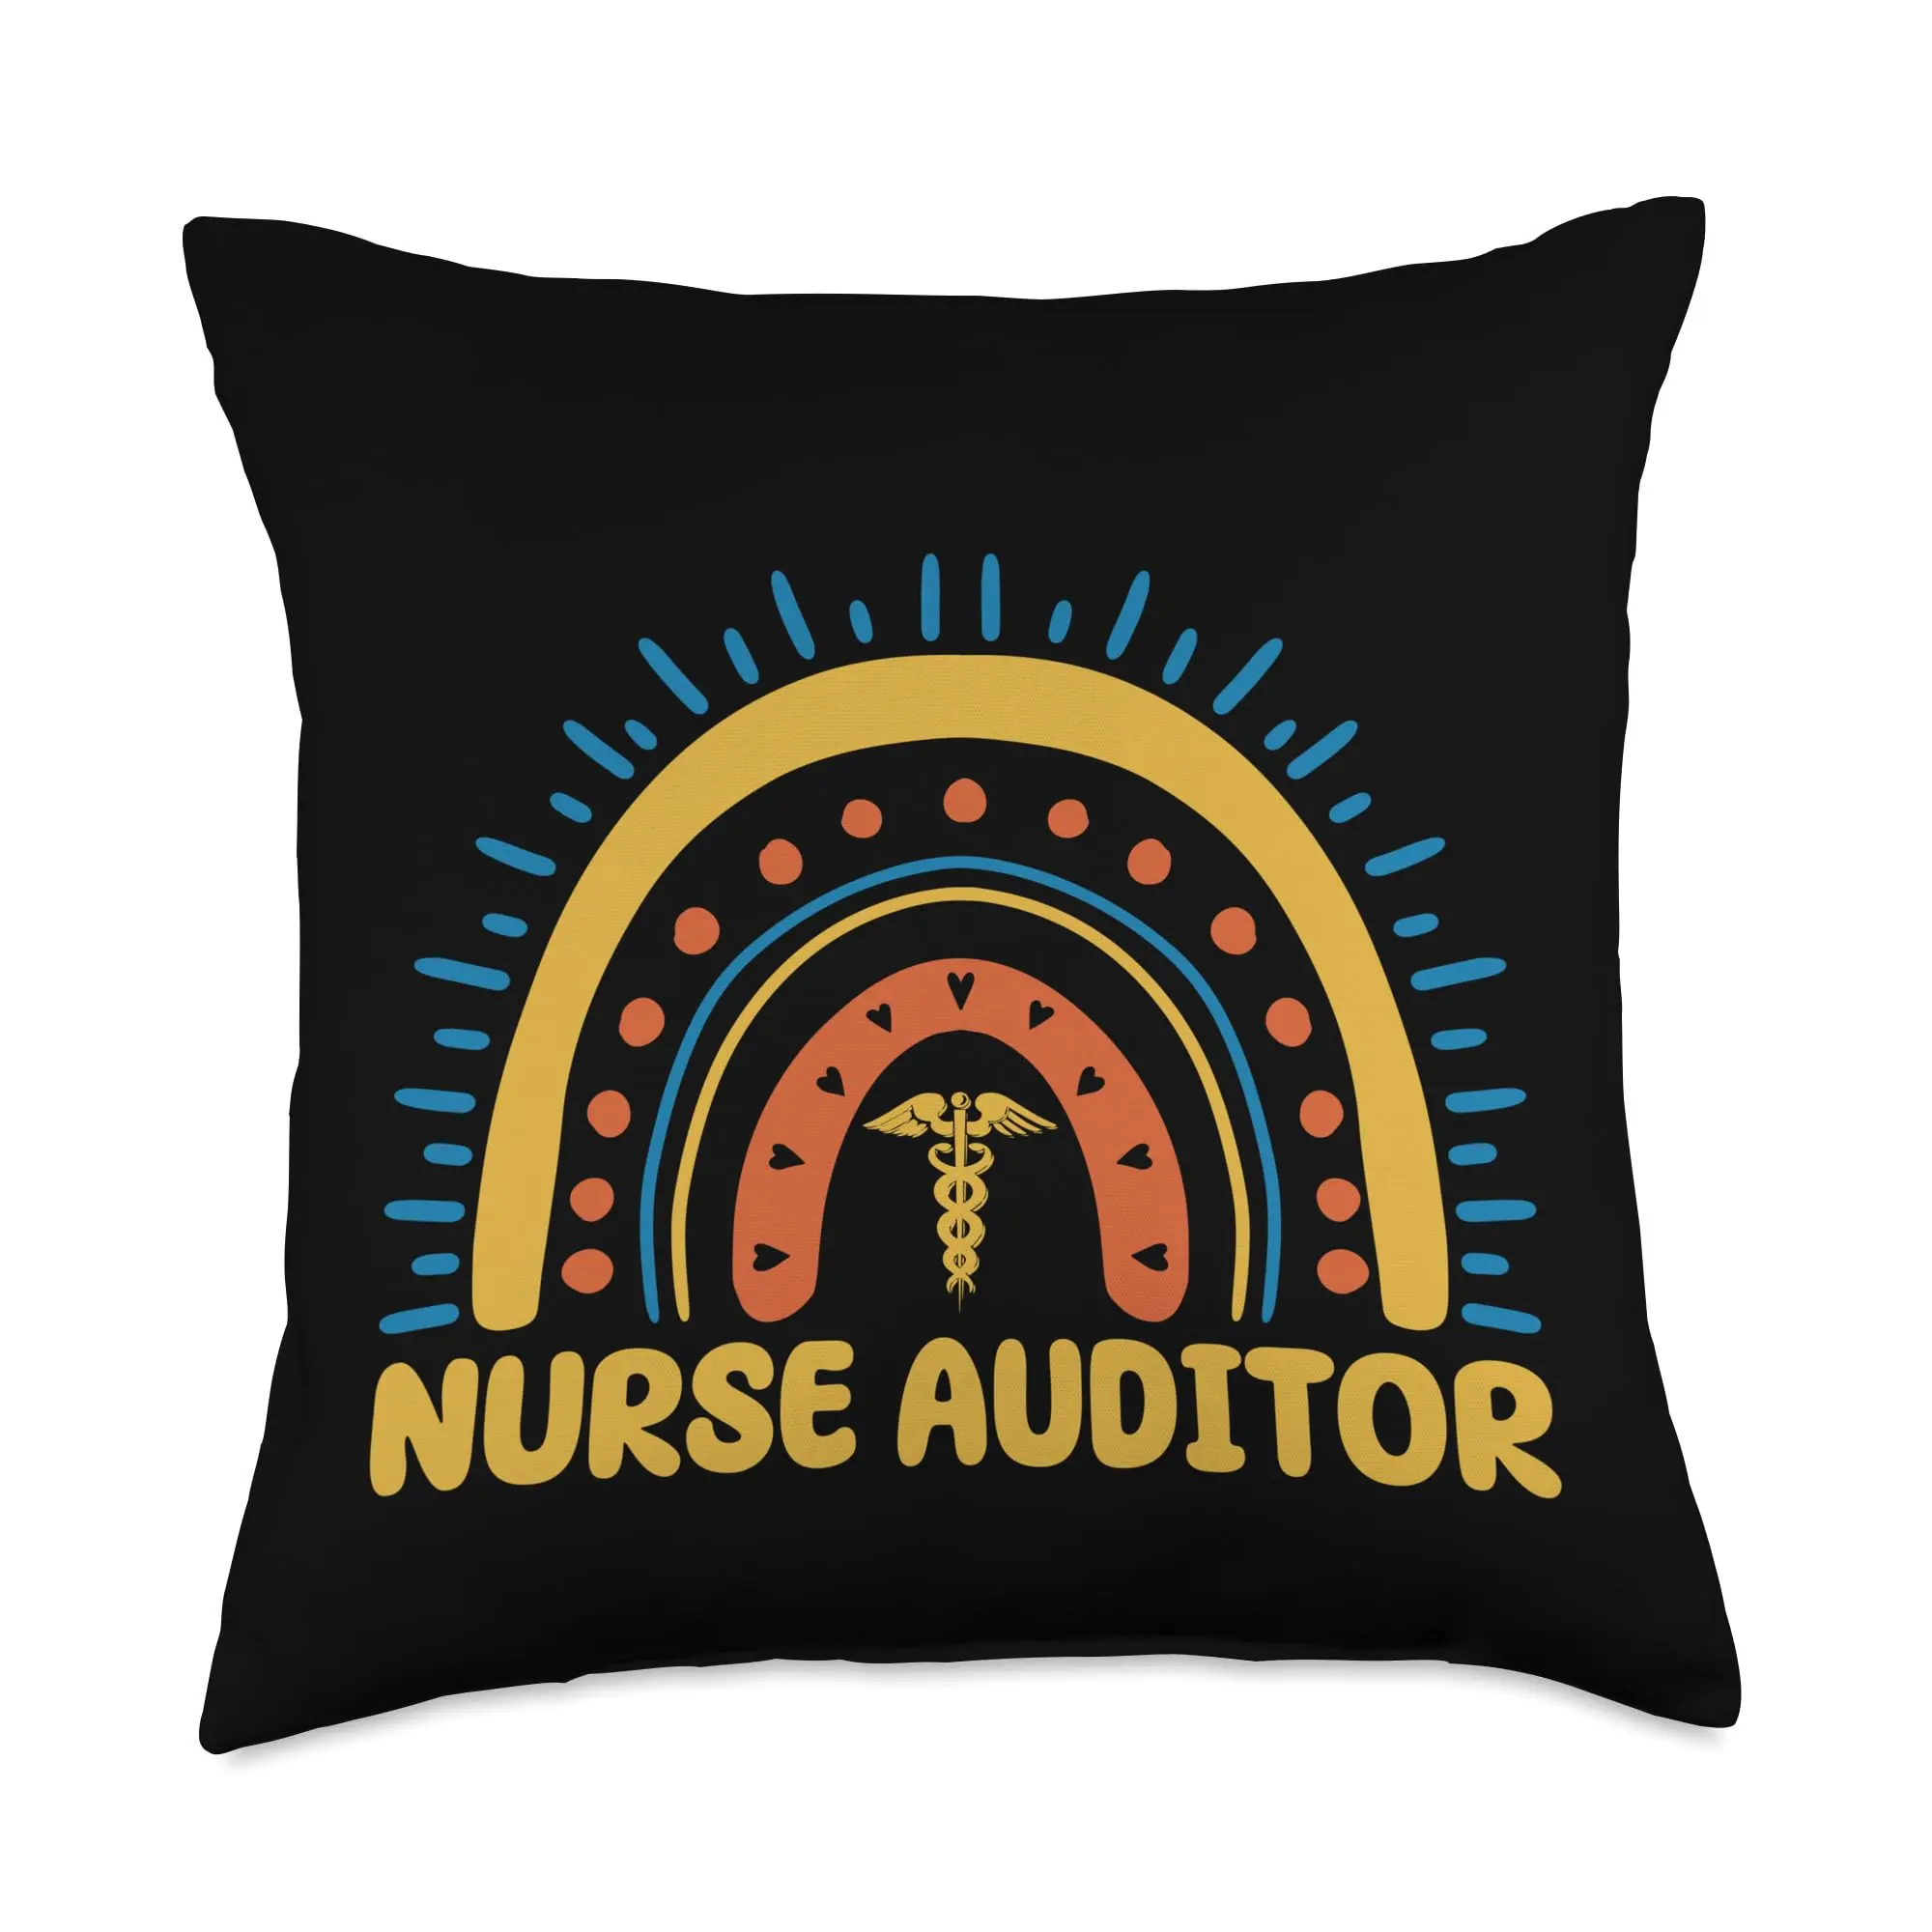 nurse auditor jobs - What is the concept of nursing audit